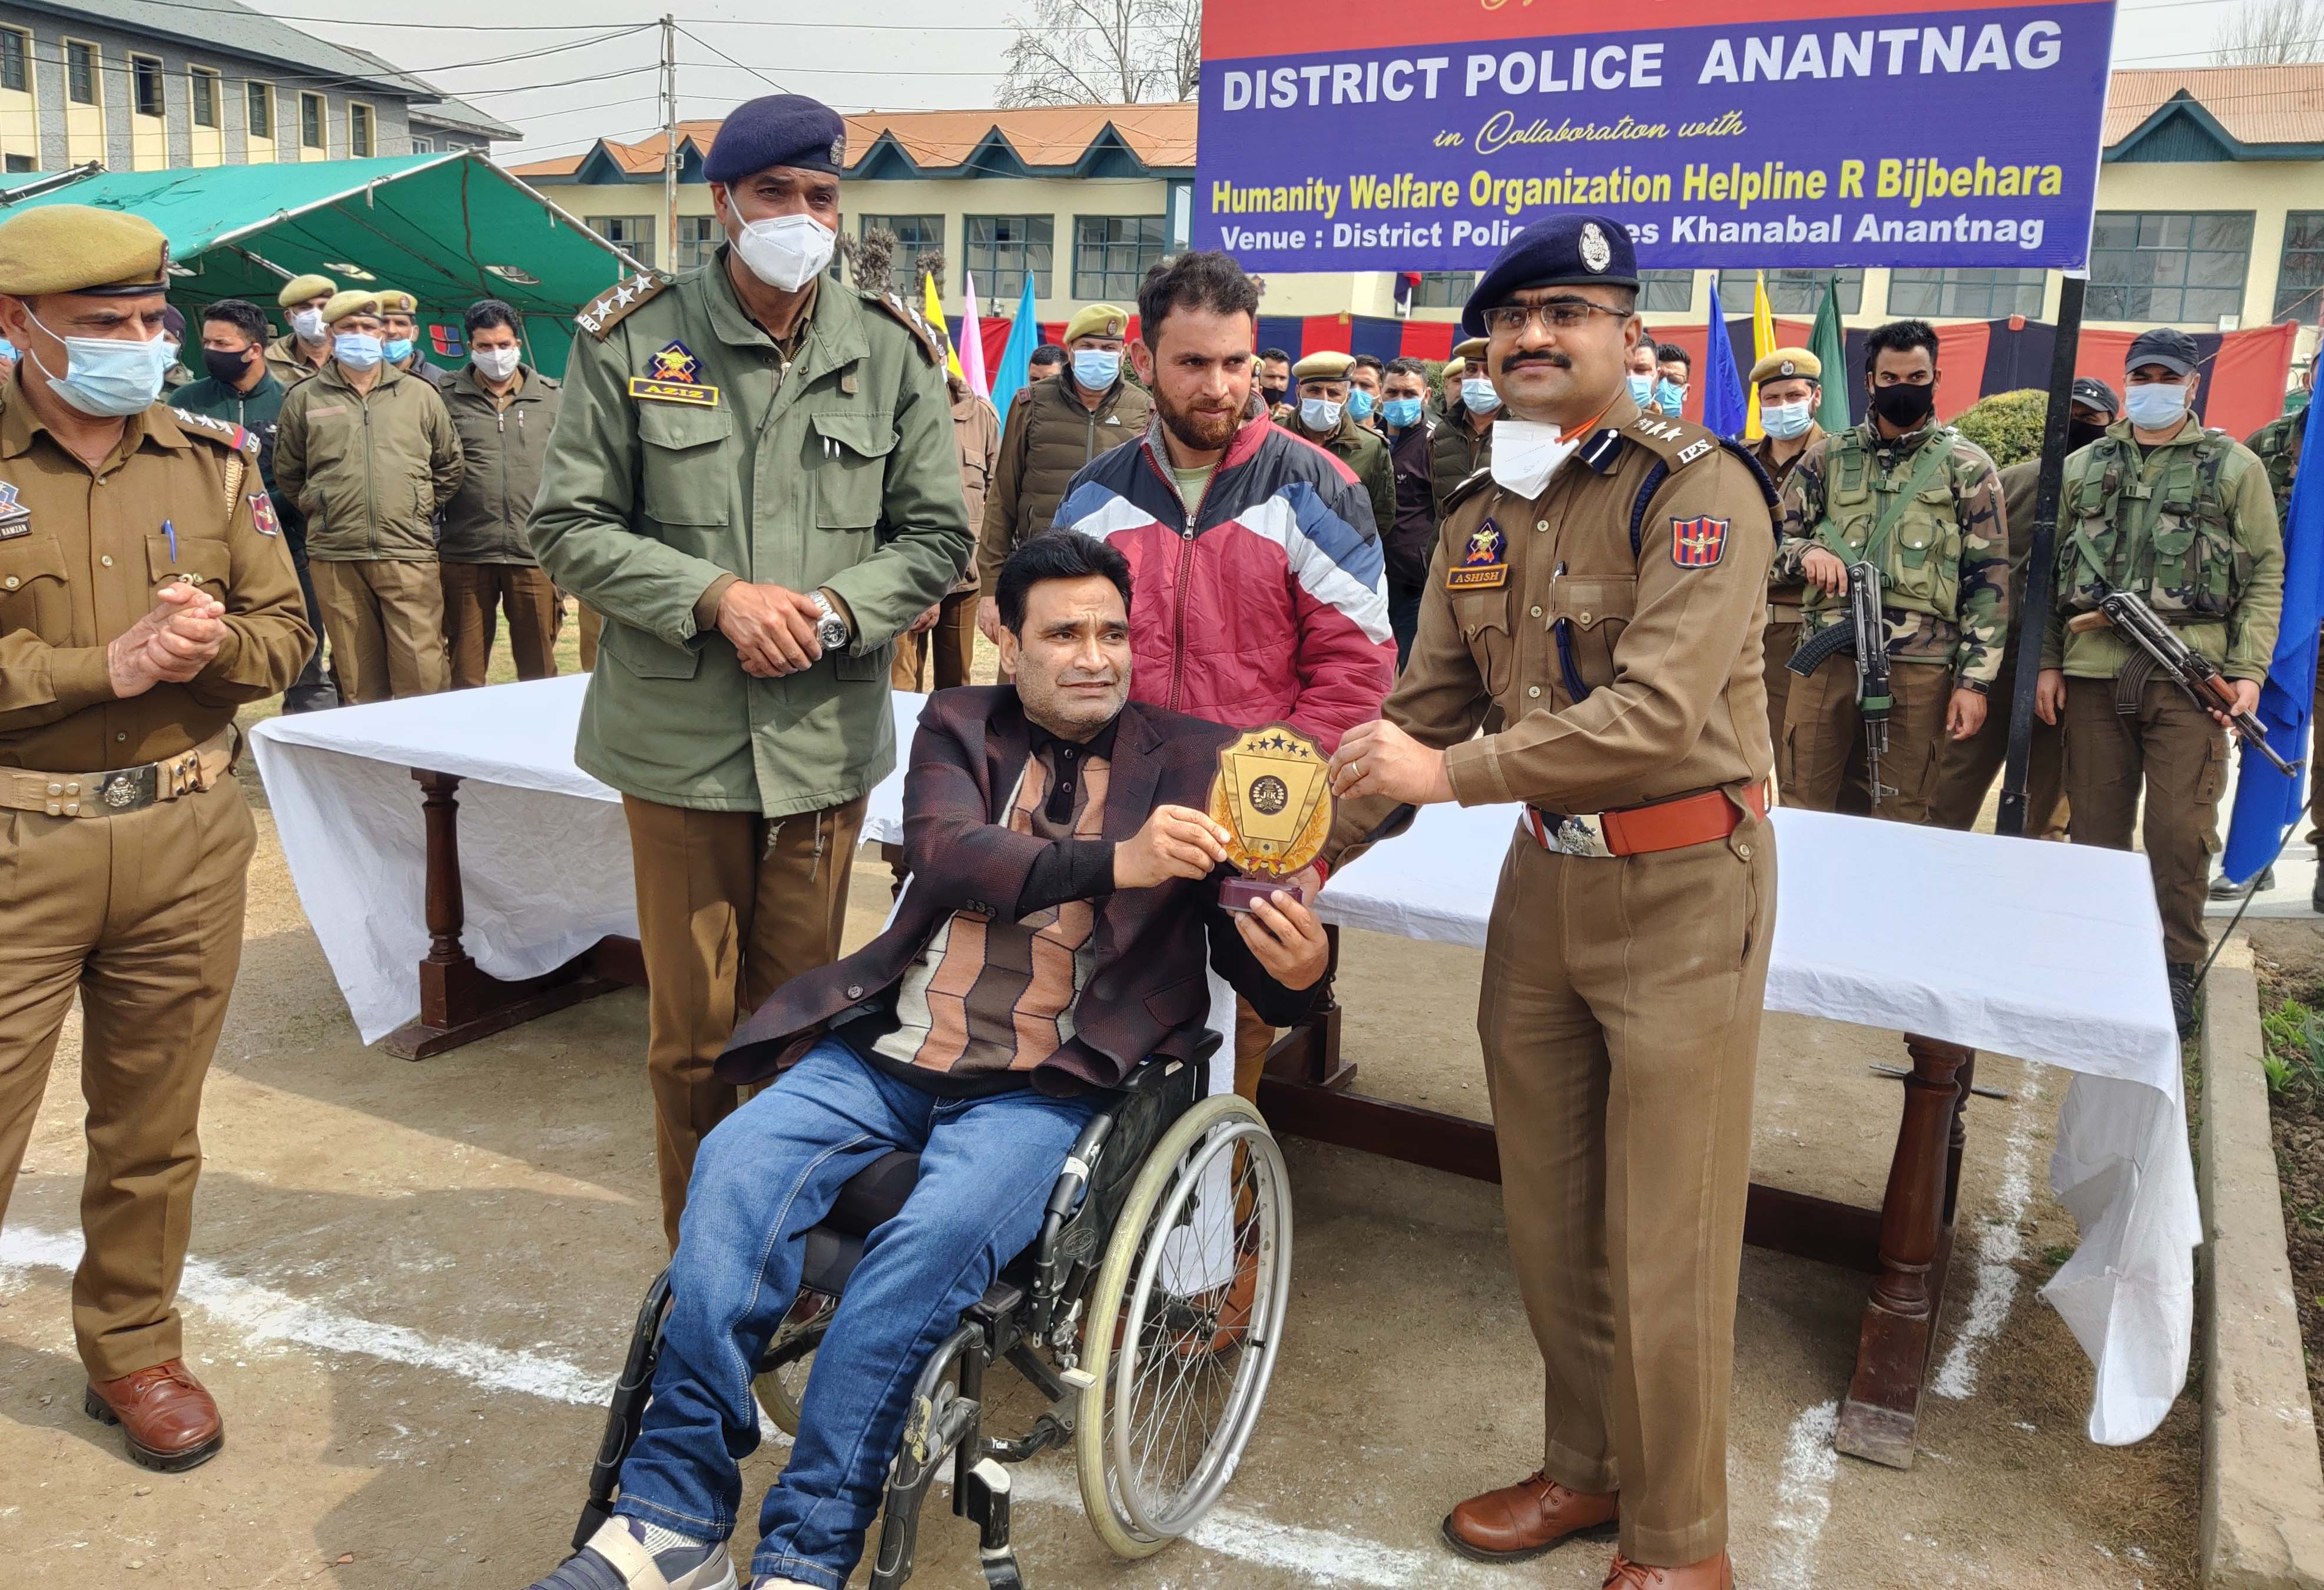 A participant being awarded by the Police officer at DPL Anantnag on Saturday.